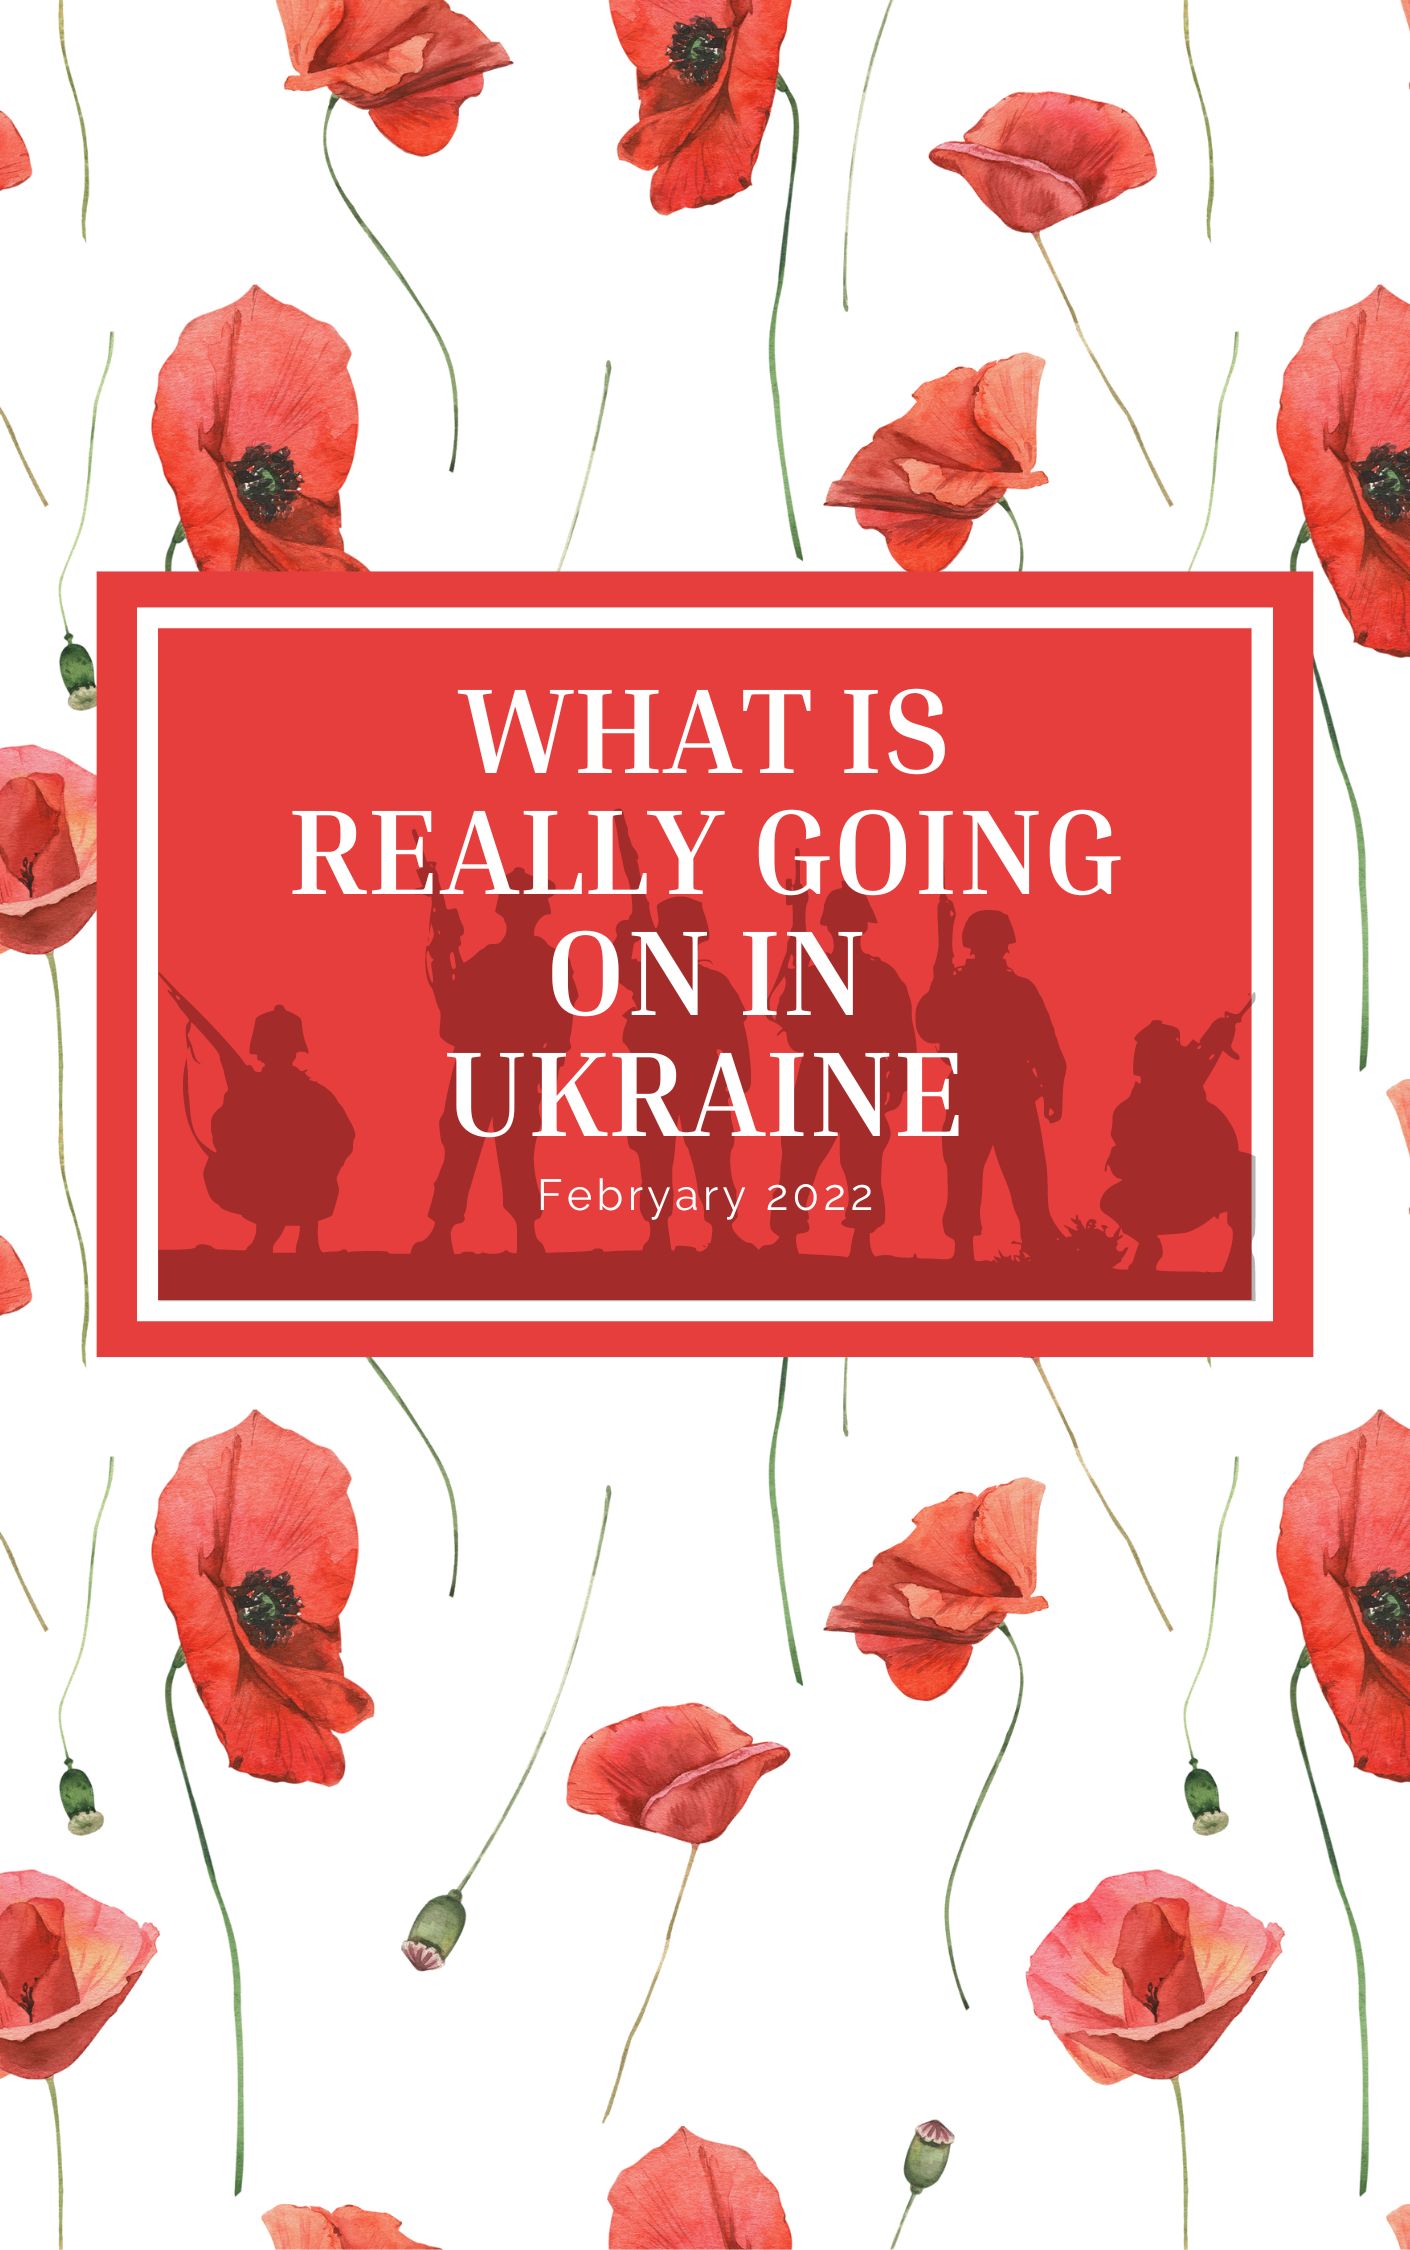 book cover of the book What is really going on in Ukraine